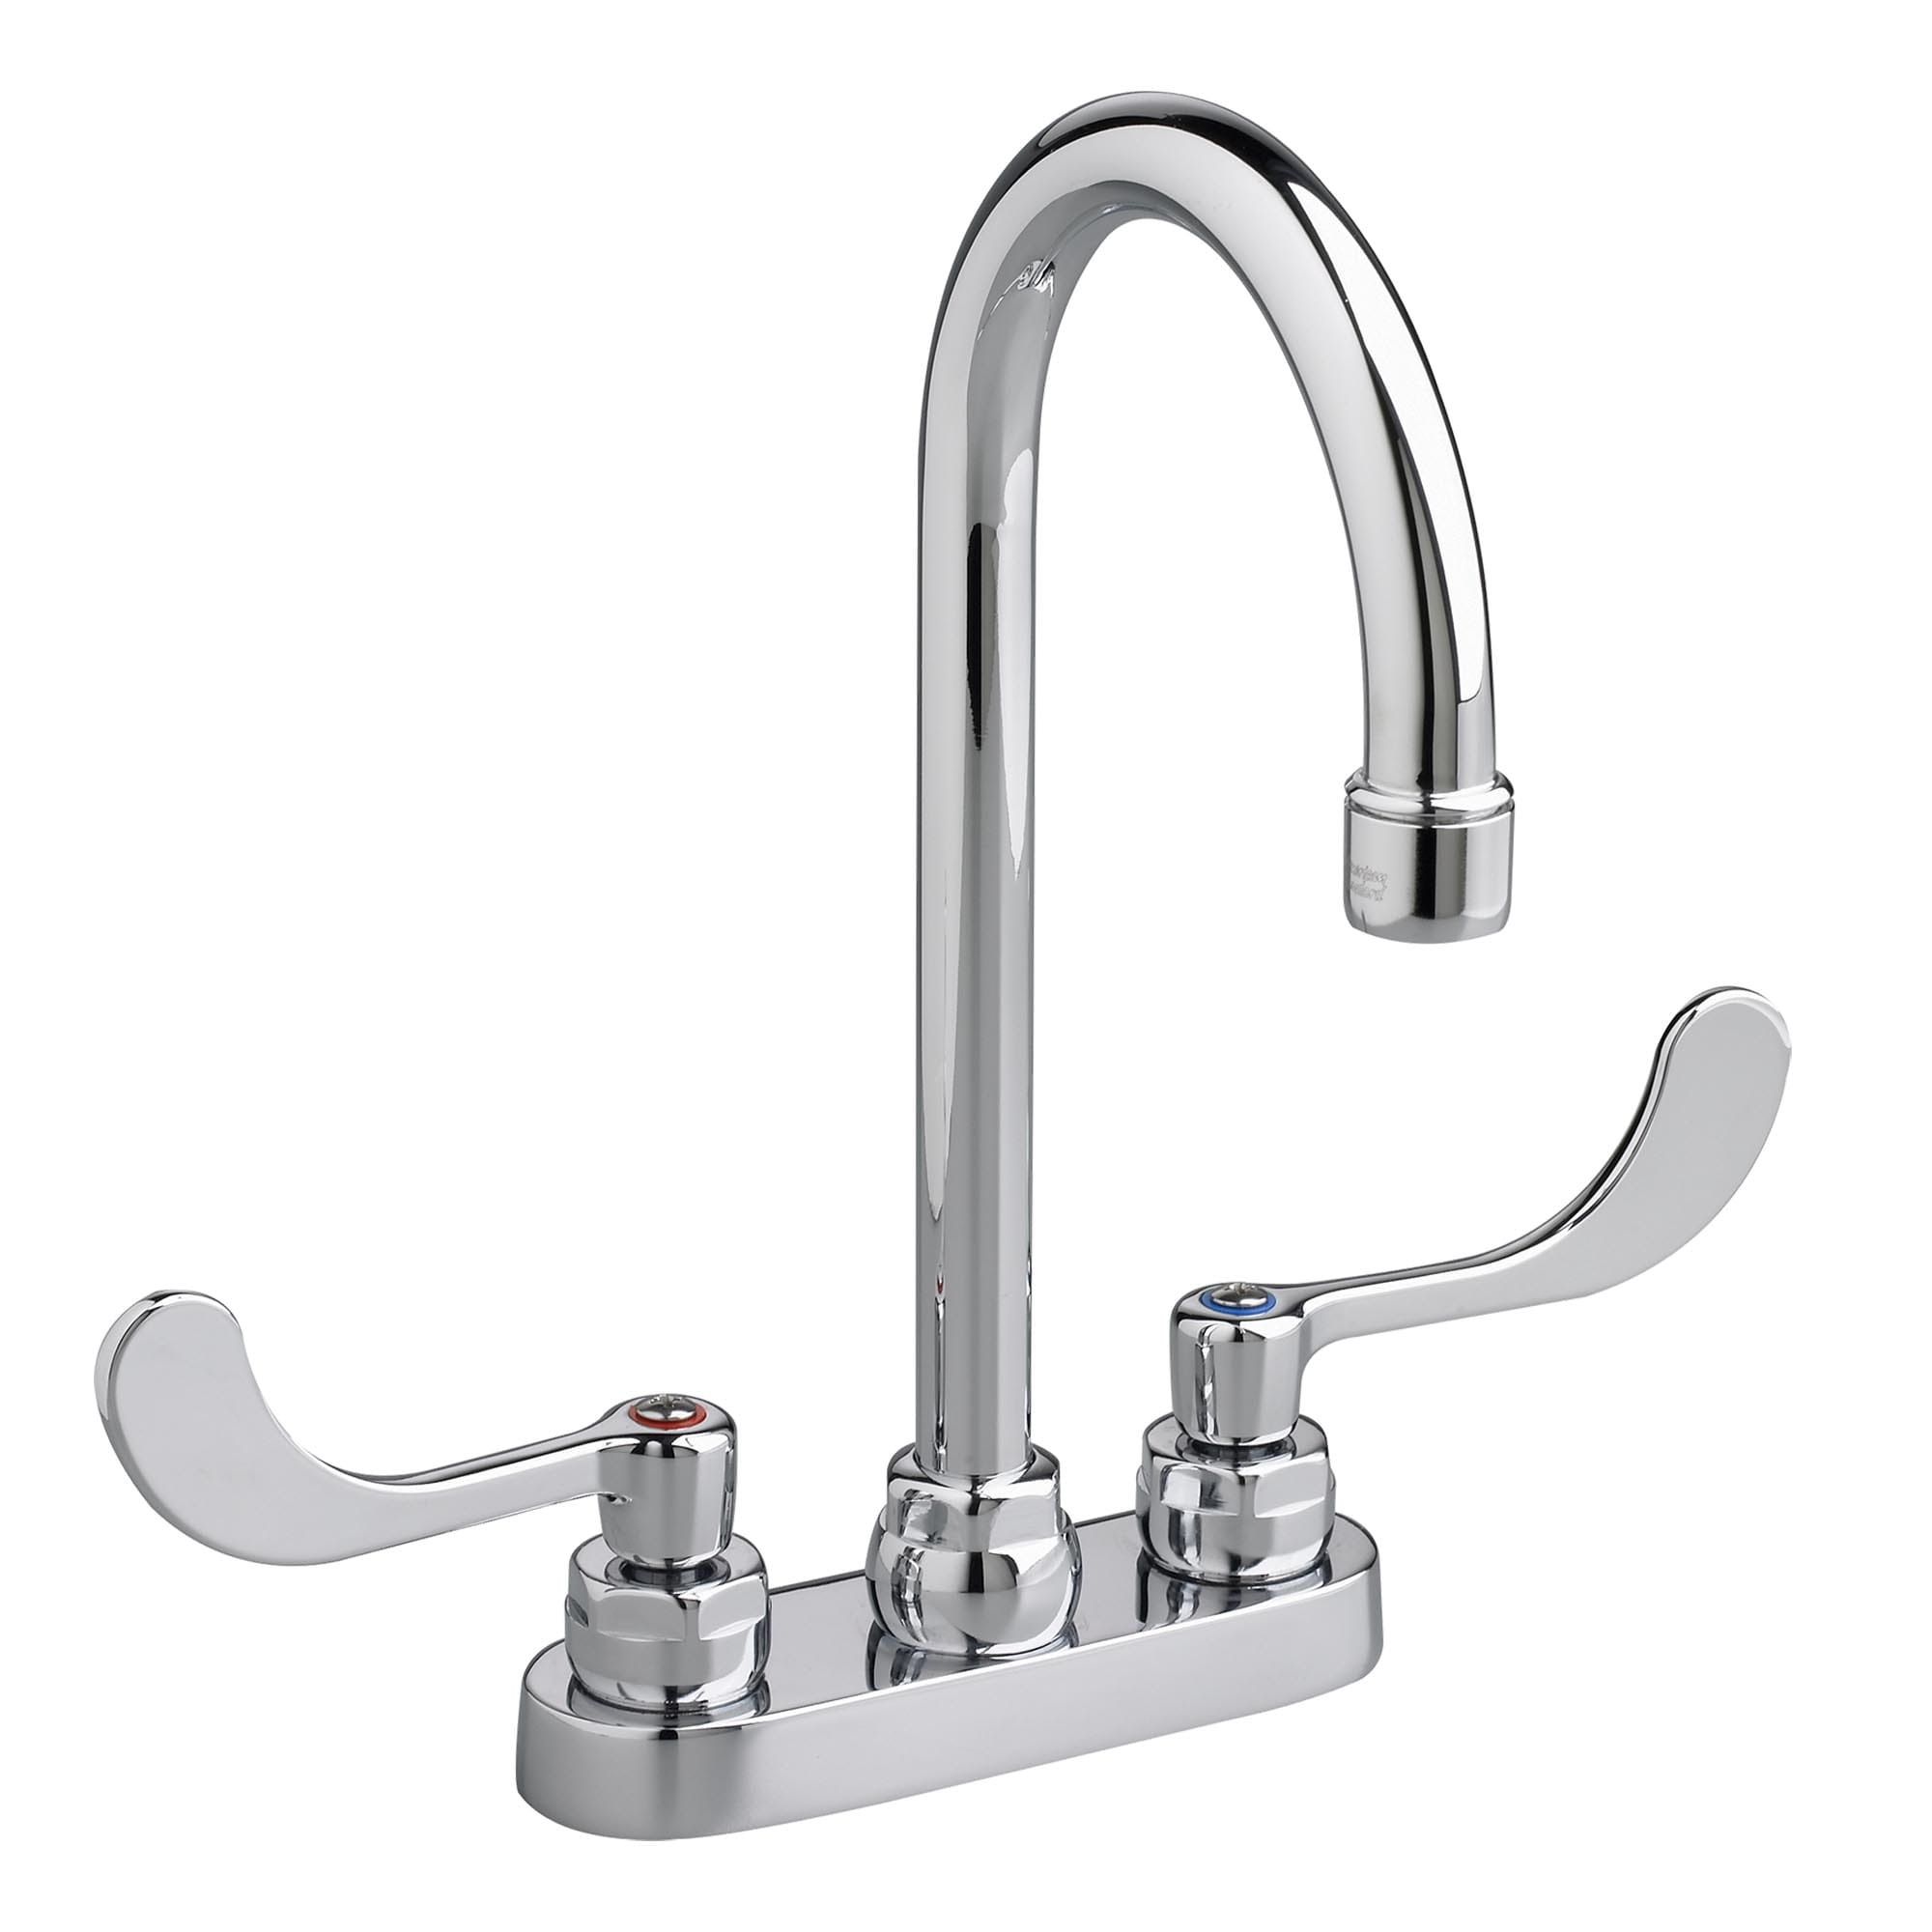 Monterrey® 4-Inch Centerset Gooseneck Faucet With Lever Handles 1.5 gpm/5.7 Lpm With Grid Drain